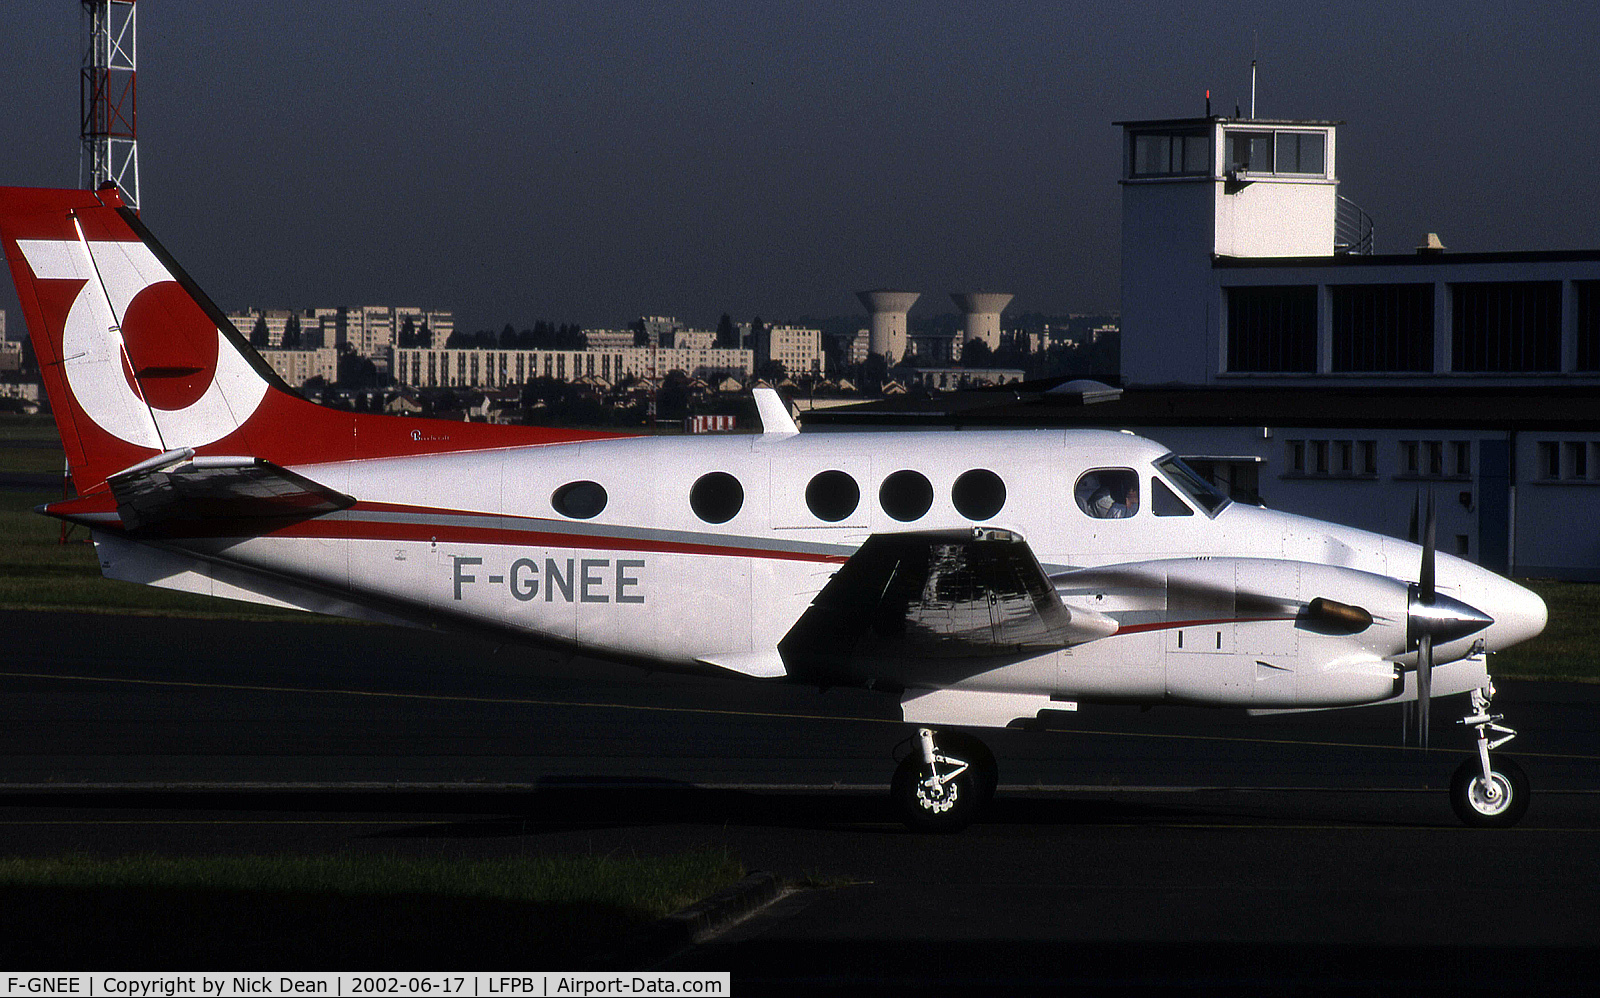 F-GNEE, 1993 Beech C90A King Air C/N LJ-1328, This has a stunning scheme now I really need to get a digital